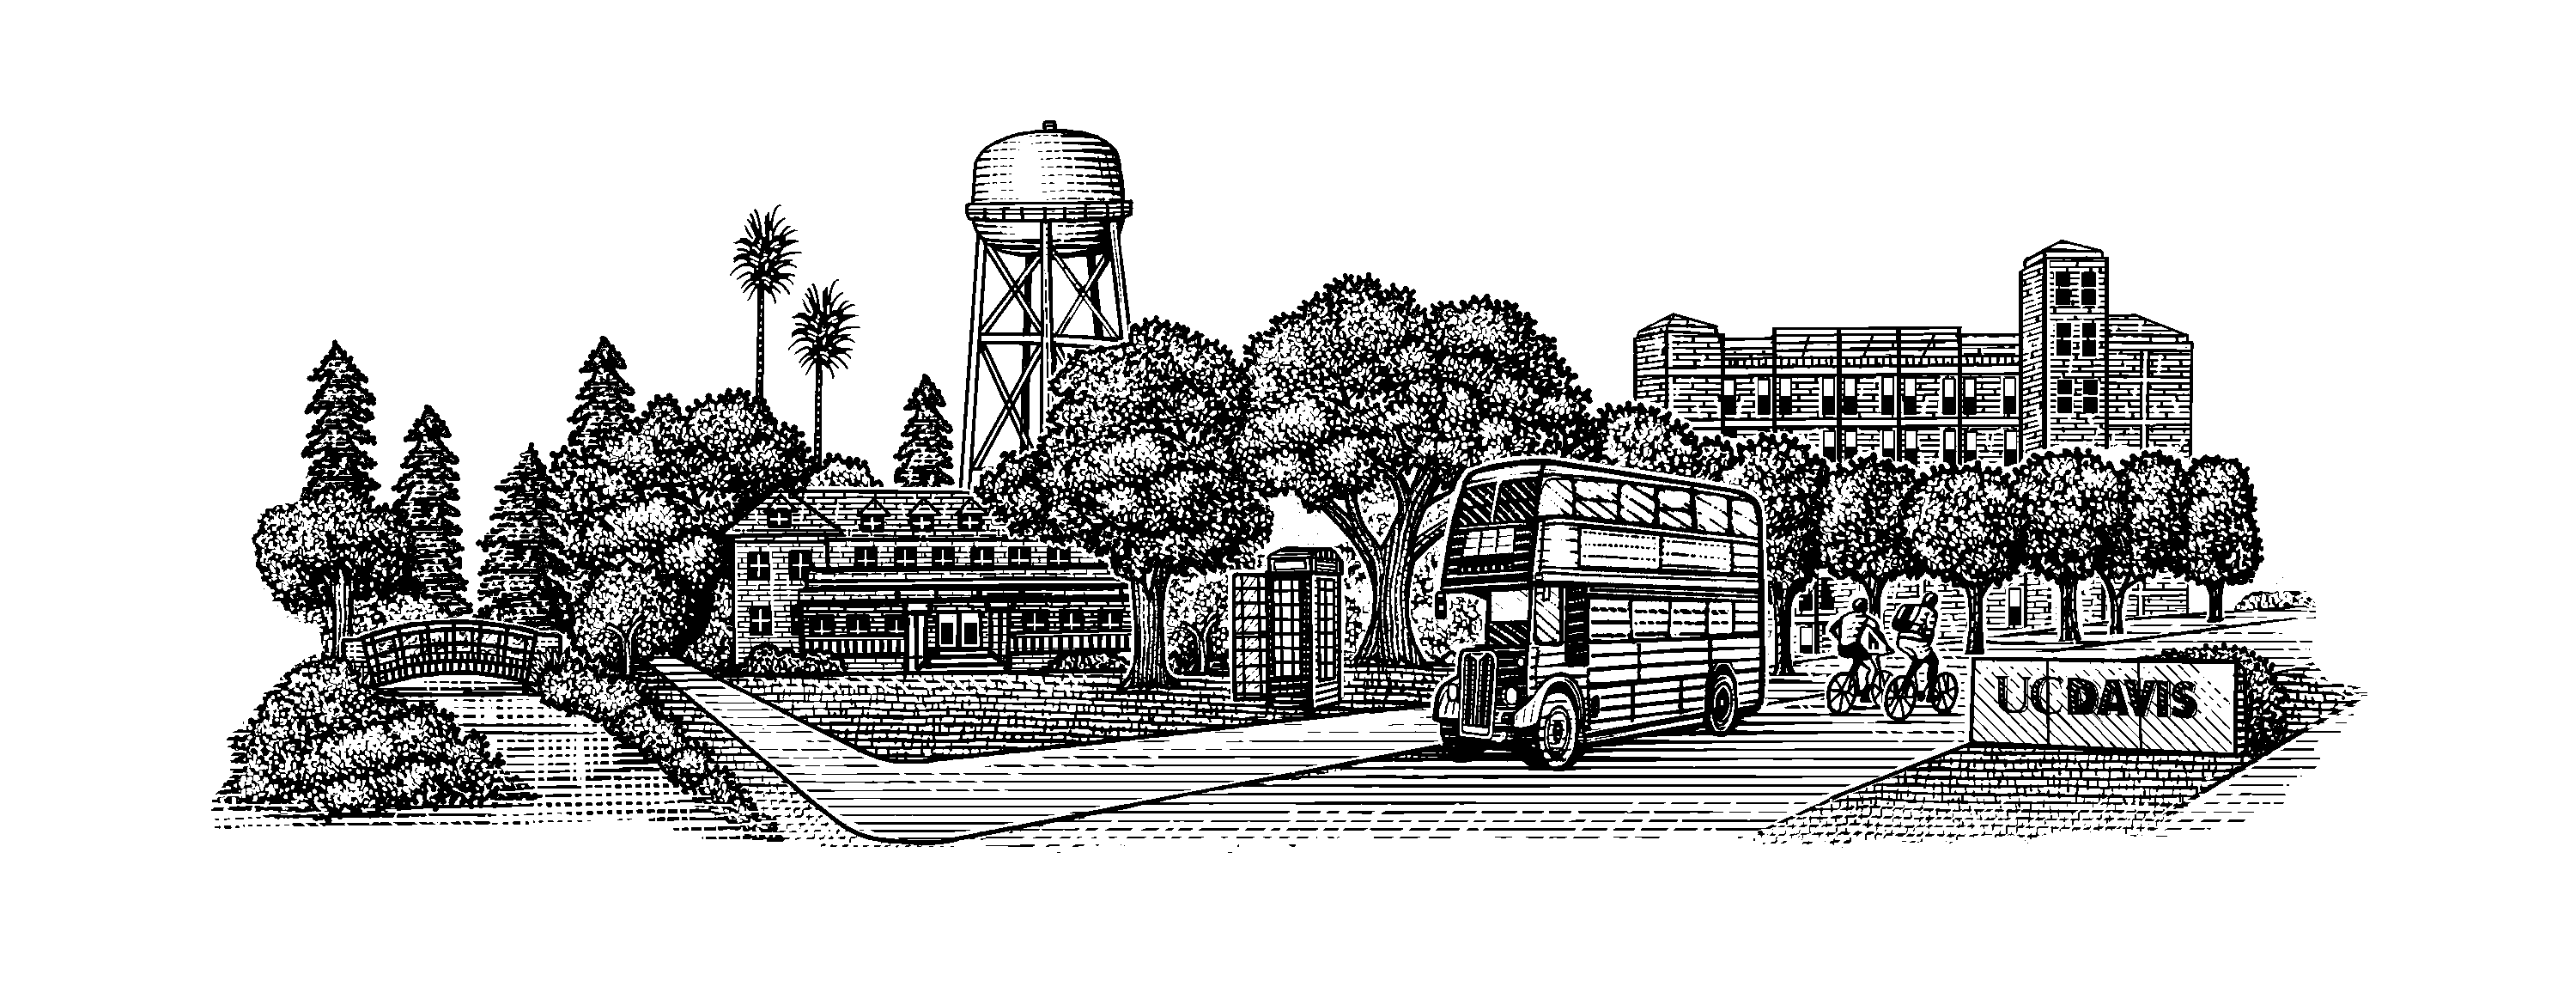 Landscape of Campus drawing